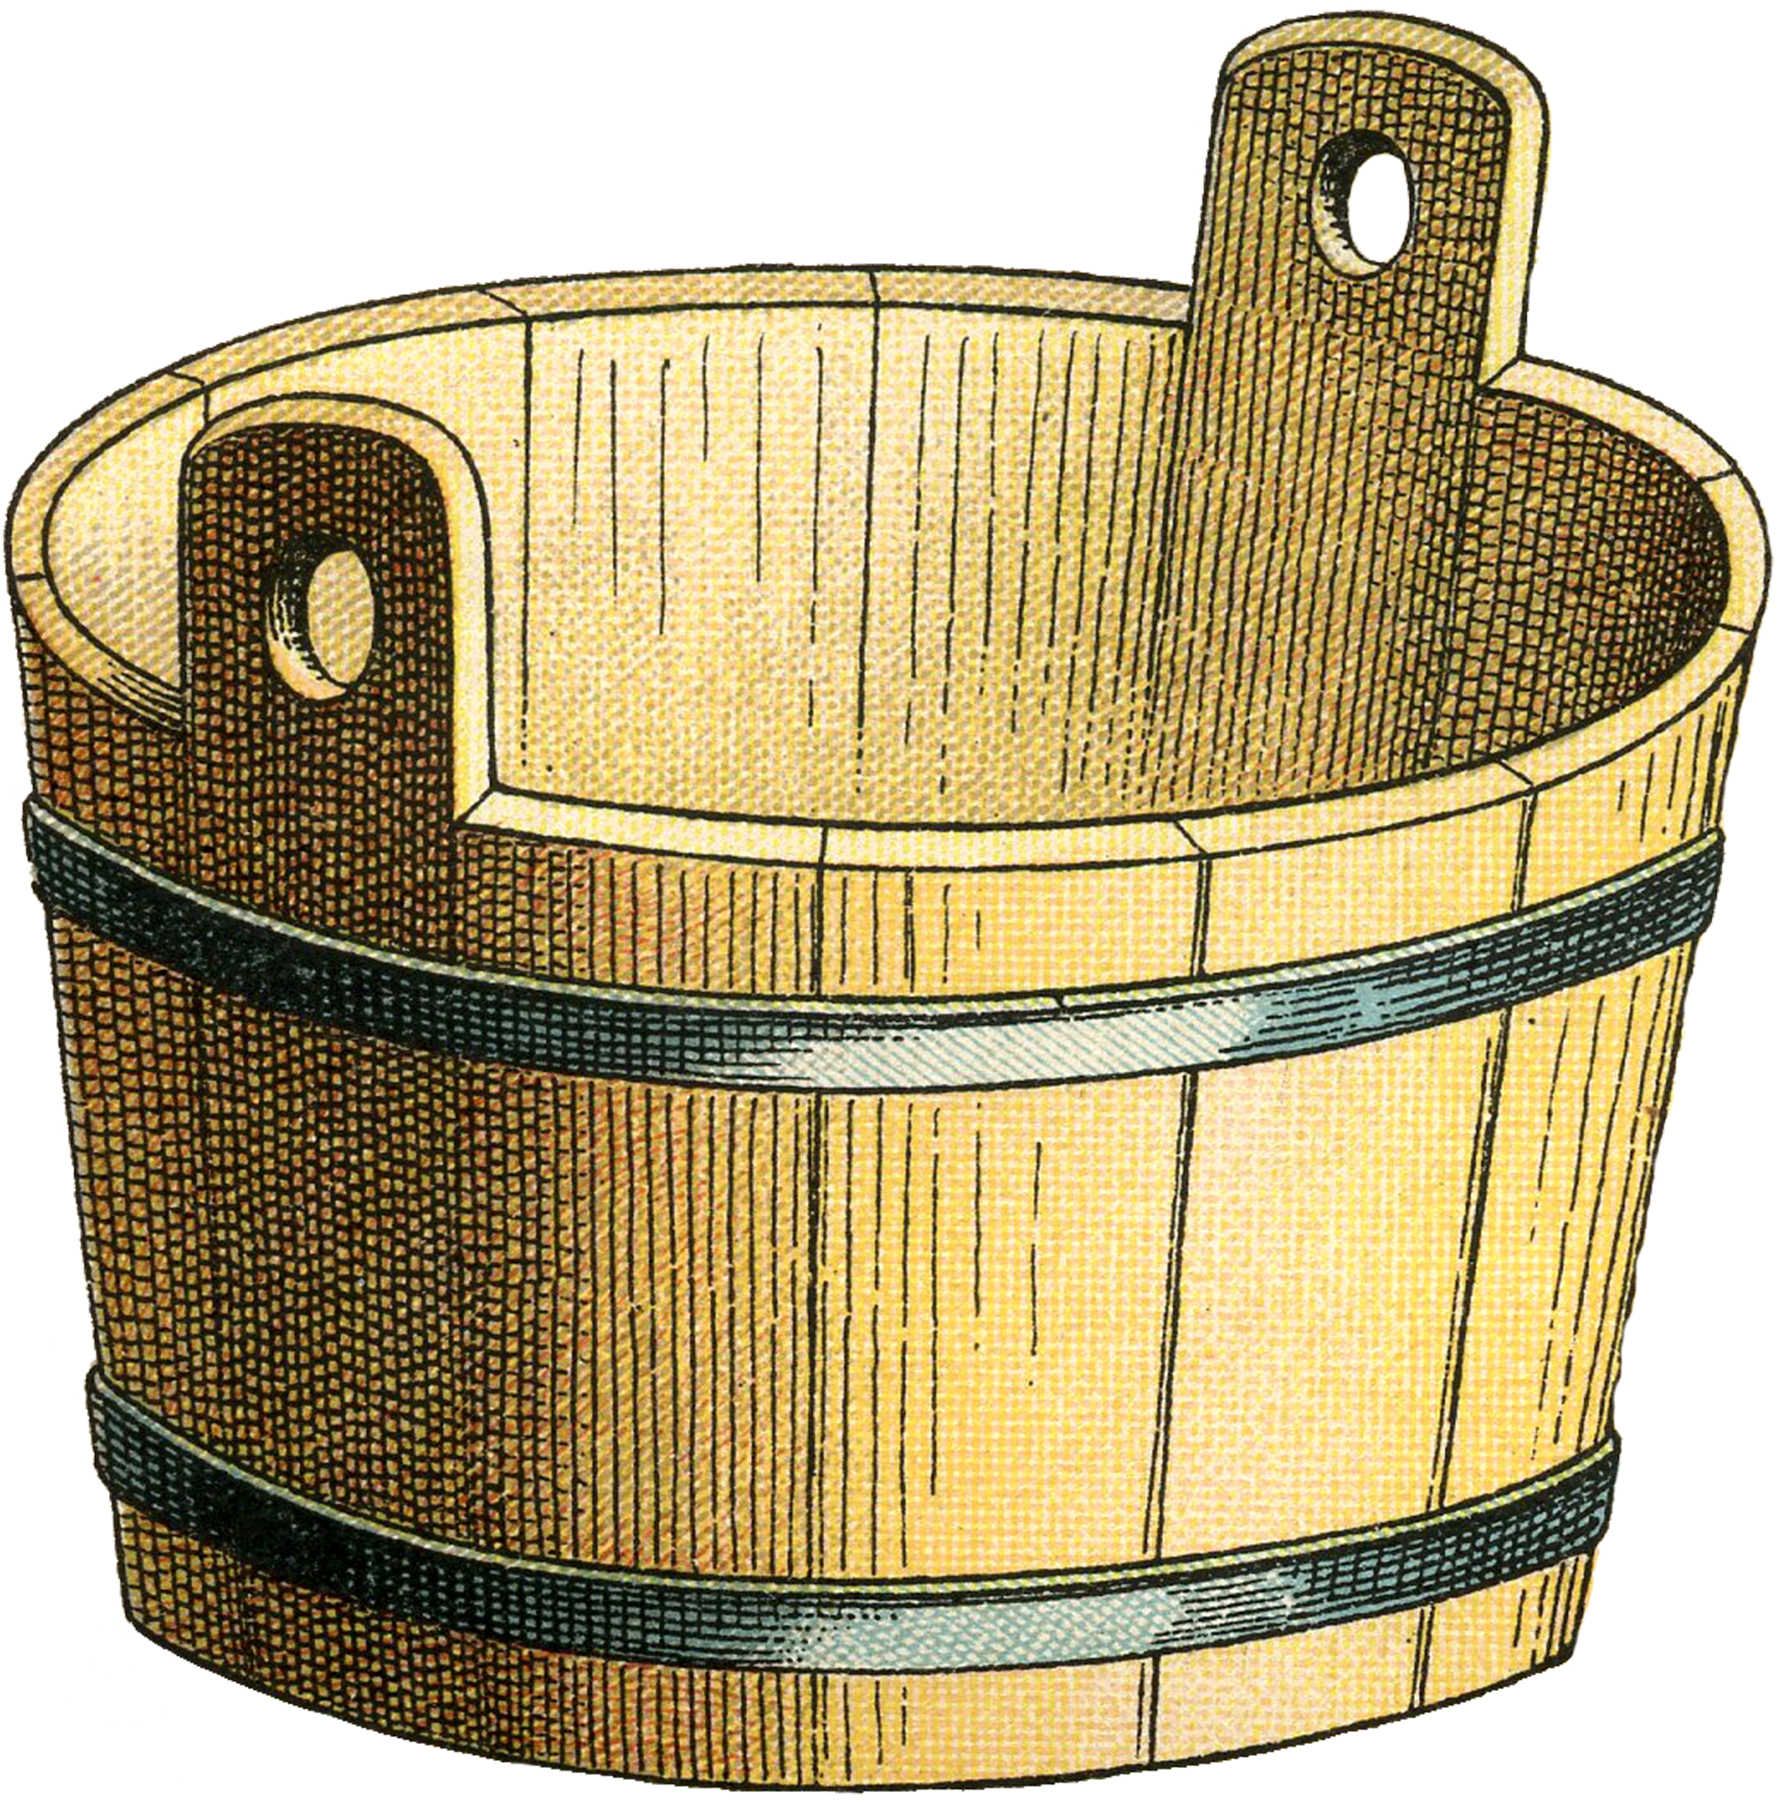 Old Wooden Bucket Image  The Graphics Fairy